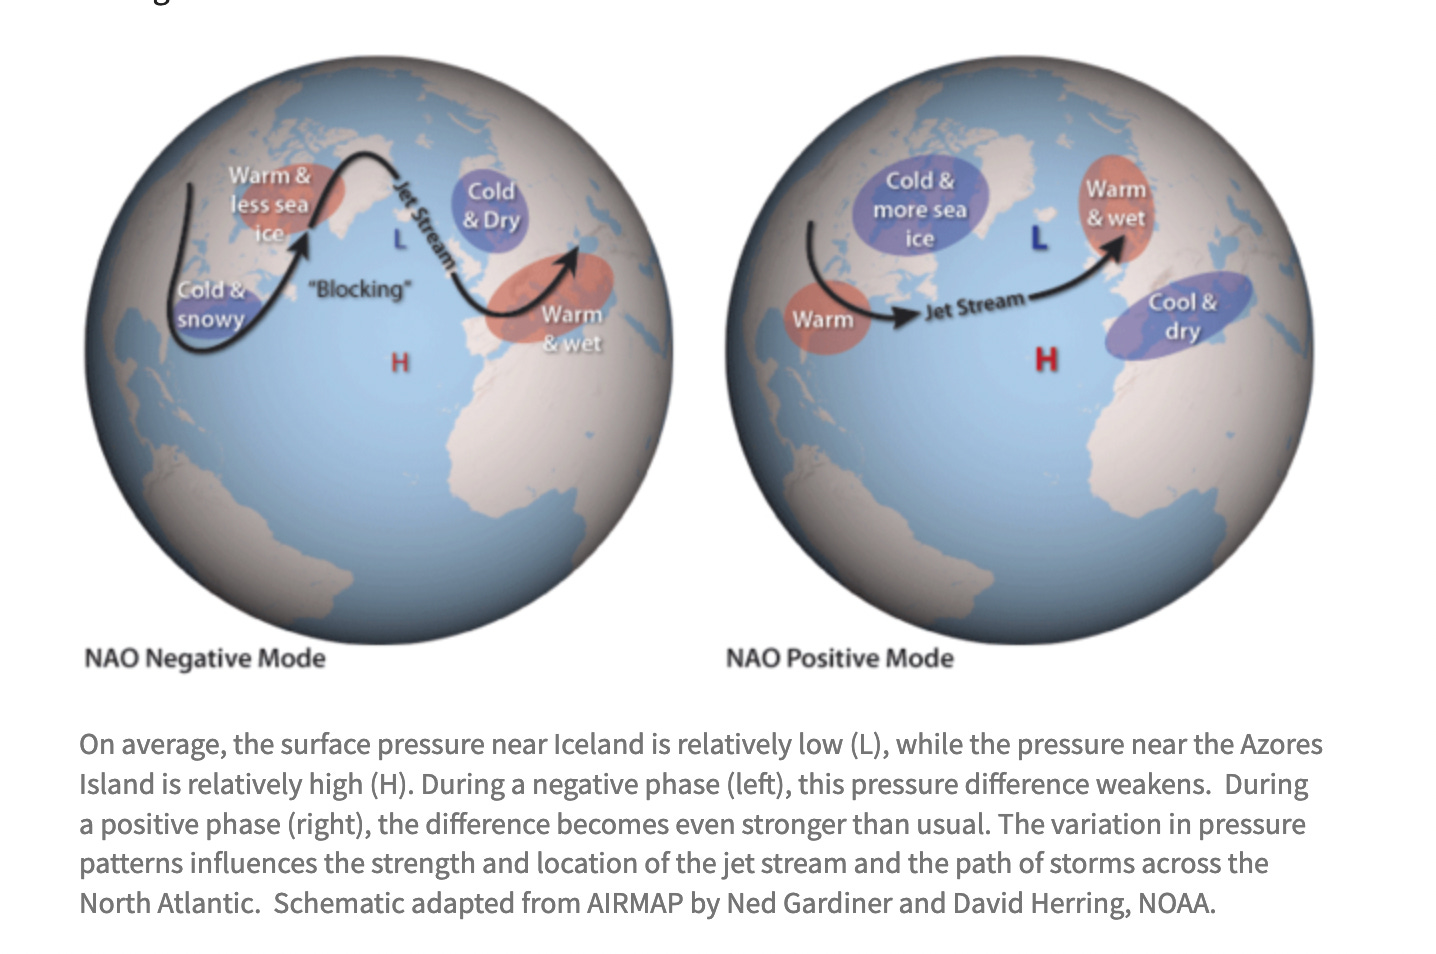 on the left is a globe showing the nao negative mode over the north atlantic, with the jet stream arcing high up into the arctic. it says "cold and snowy" over the northeast, "warm & less sea ice" over the canadian arctic, "cold and dry" over north europe, and "warm & wet" over south europe. the right hand globe shows the nao positive mode with the jet stream going straight across and not arcing. it says "warm" over the eastern us, "cold and more sea ice" over the canadian arctic, "warm and wet" over northern europe, and "cool and dry" over southern europe. the caption beneath the globes says “On average, the surface pressure near Iceland is relatively low (L), while the pressure near the Azores Island is relatively high (H). During a negative phase (left), this pressure difference weakens.  During a positive phase (right), the difference becomes even stronger than usual. The variation in pressure patterns influences the strength and location of the jet stream and the path of storms across the North Atlantic.  Schematic adapted from AIRMAP by Ned Gardiner and David Herring, NOAA.”